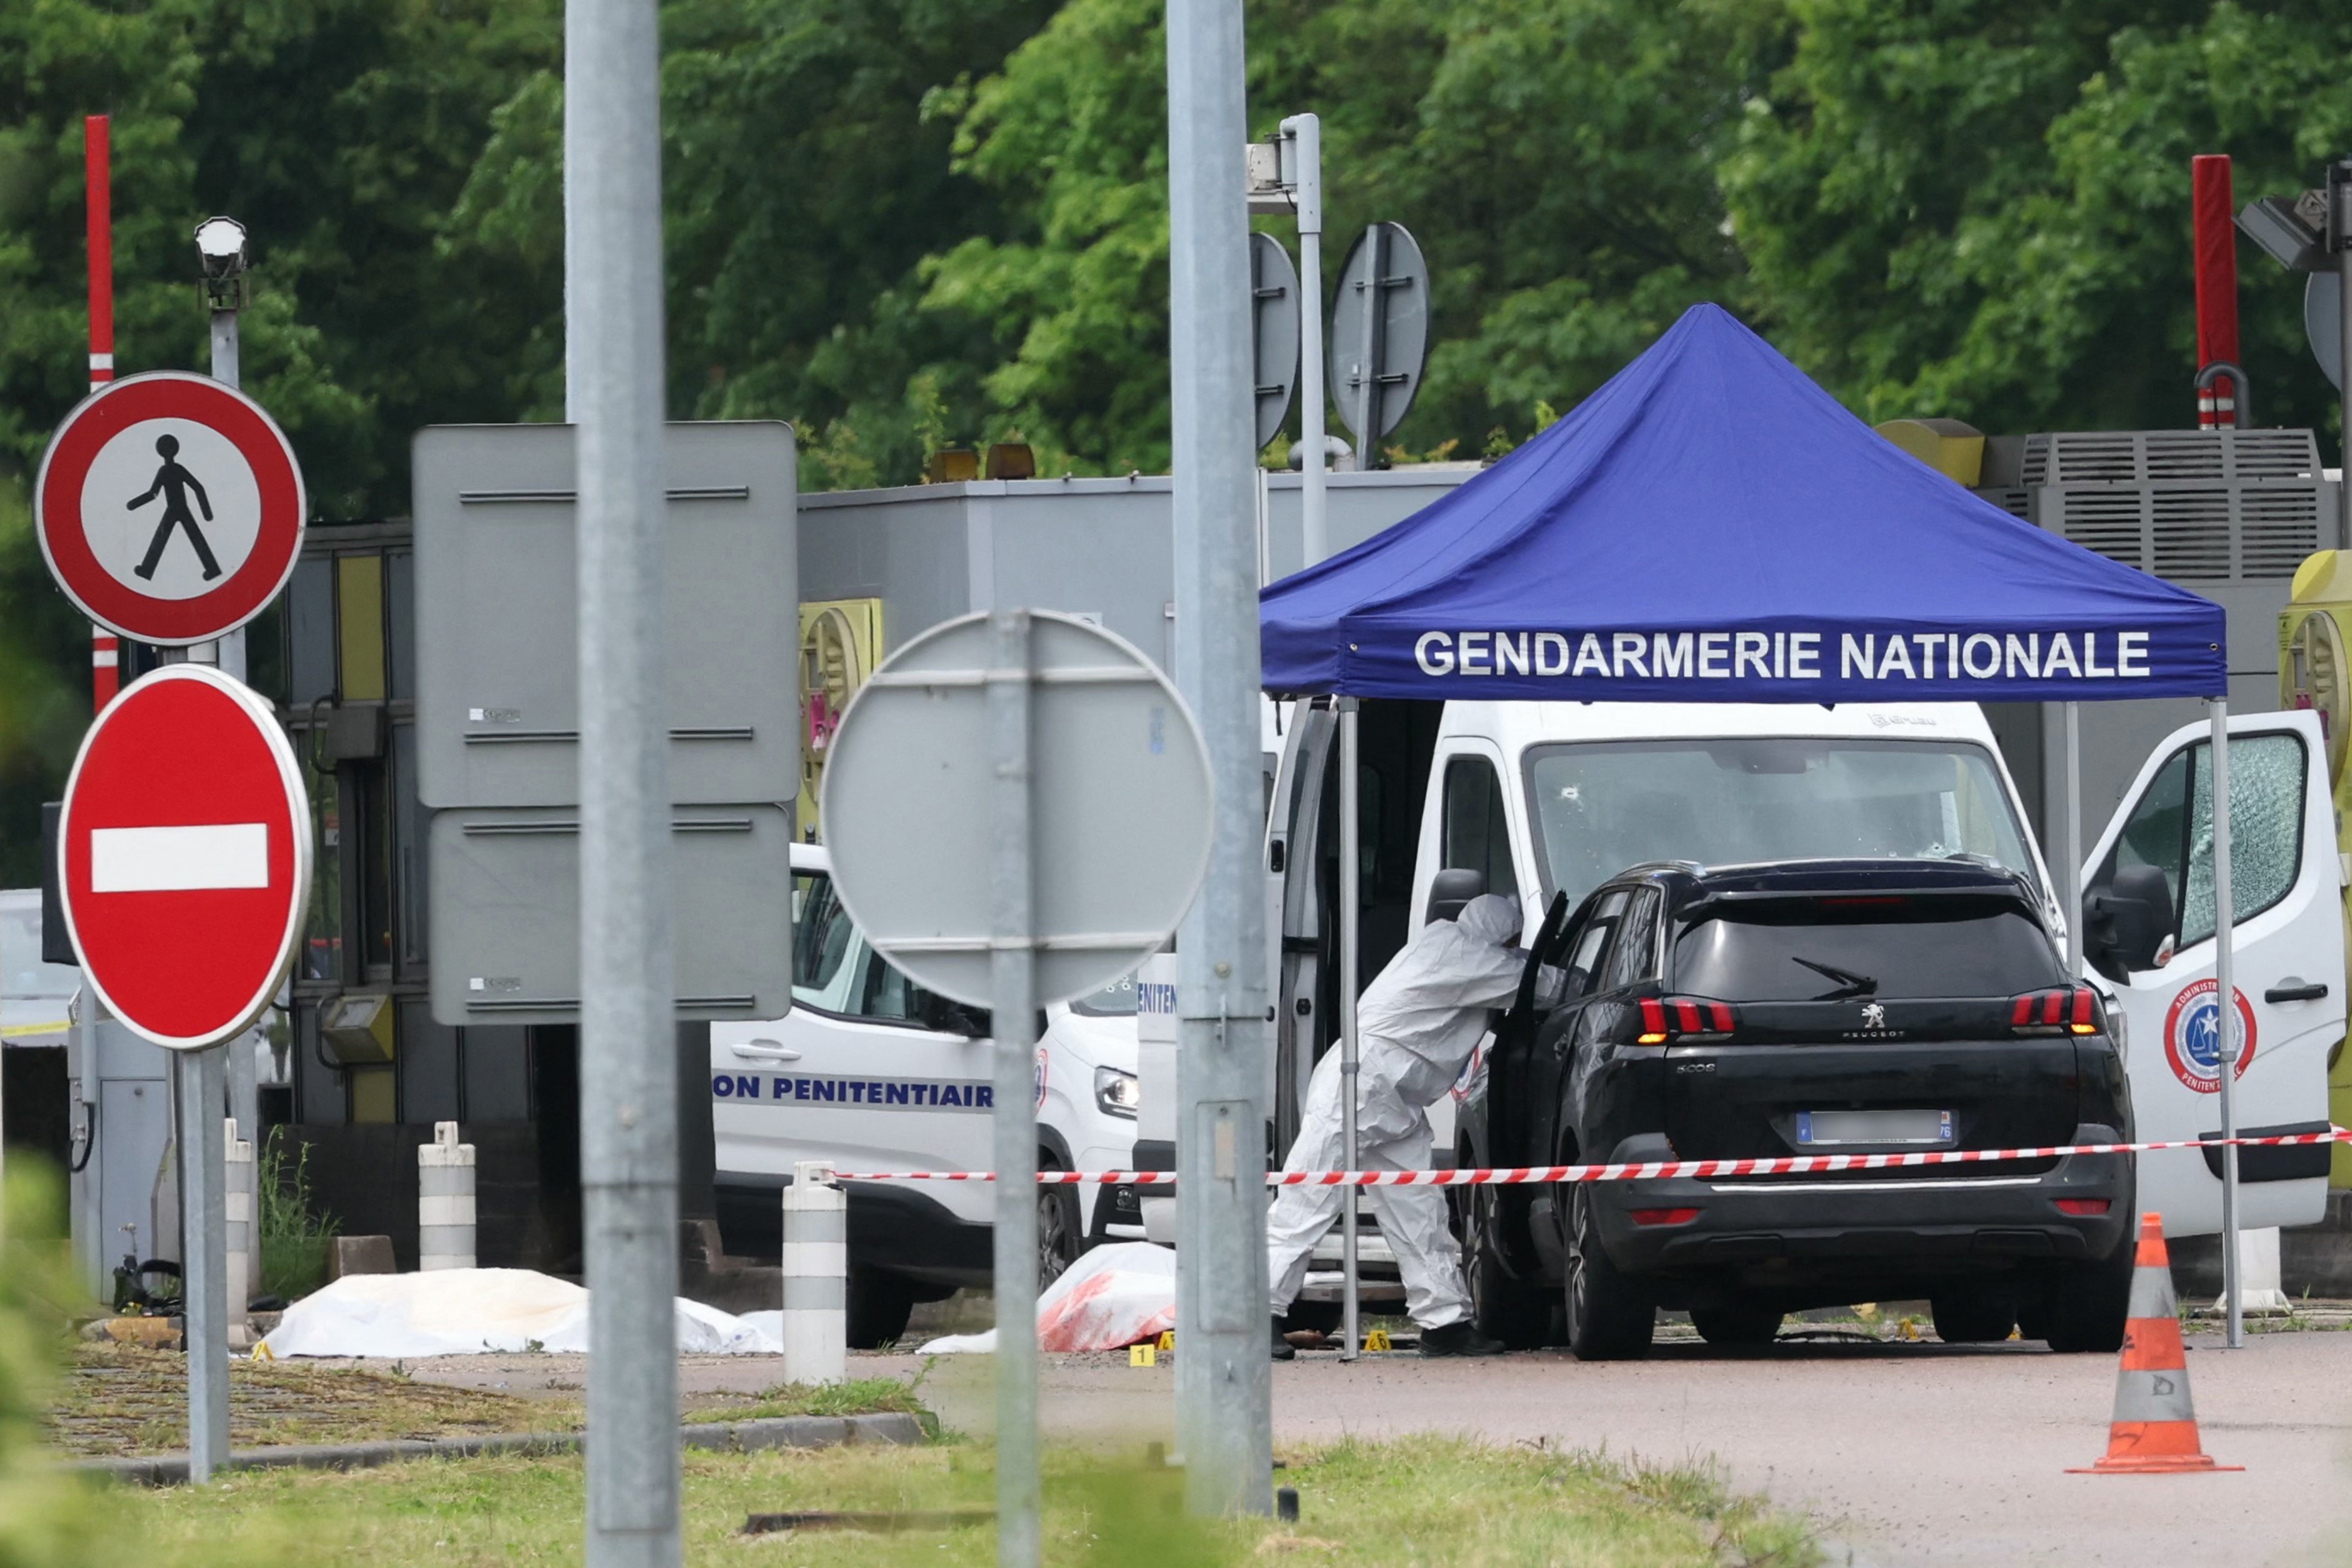 Forensic teams at the scene of the ambush that took place at Incarville tollbooth on Tuesday morning